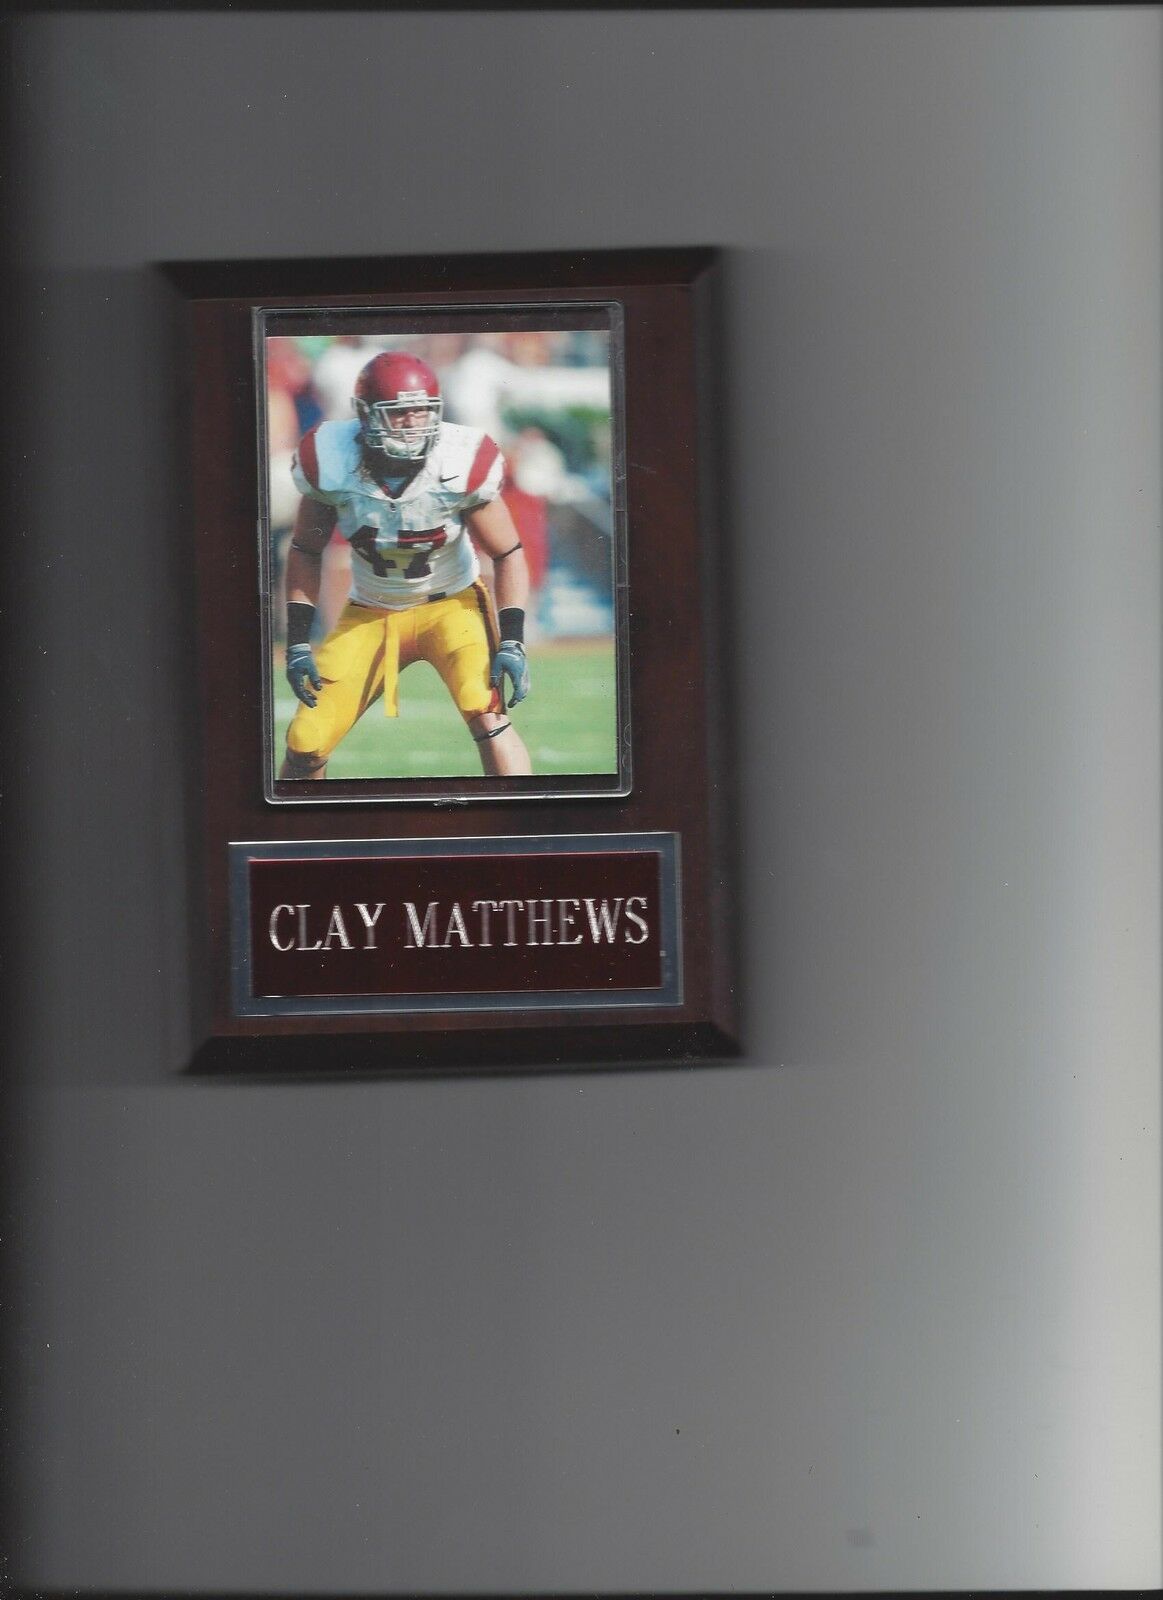 Primary image for CLAY MATTHEWS PLAQUE USC TROJANS FOOTBALL NCAA UNIVERSITY SOUTHERN CALIFORNIA